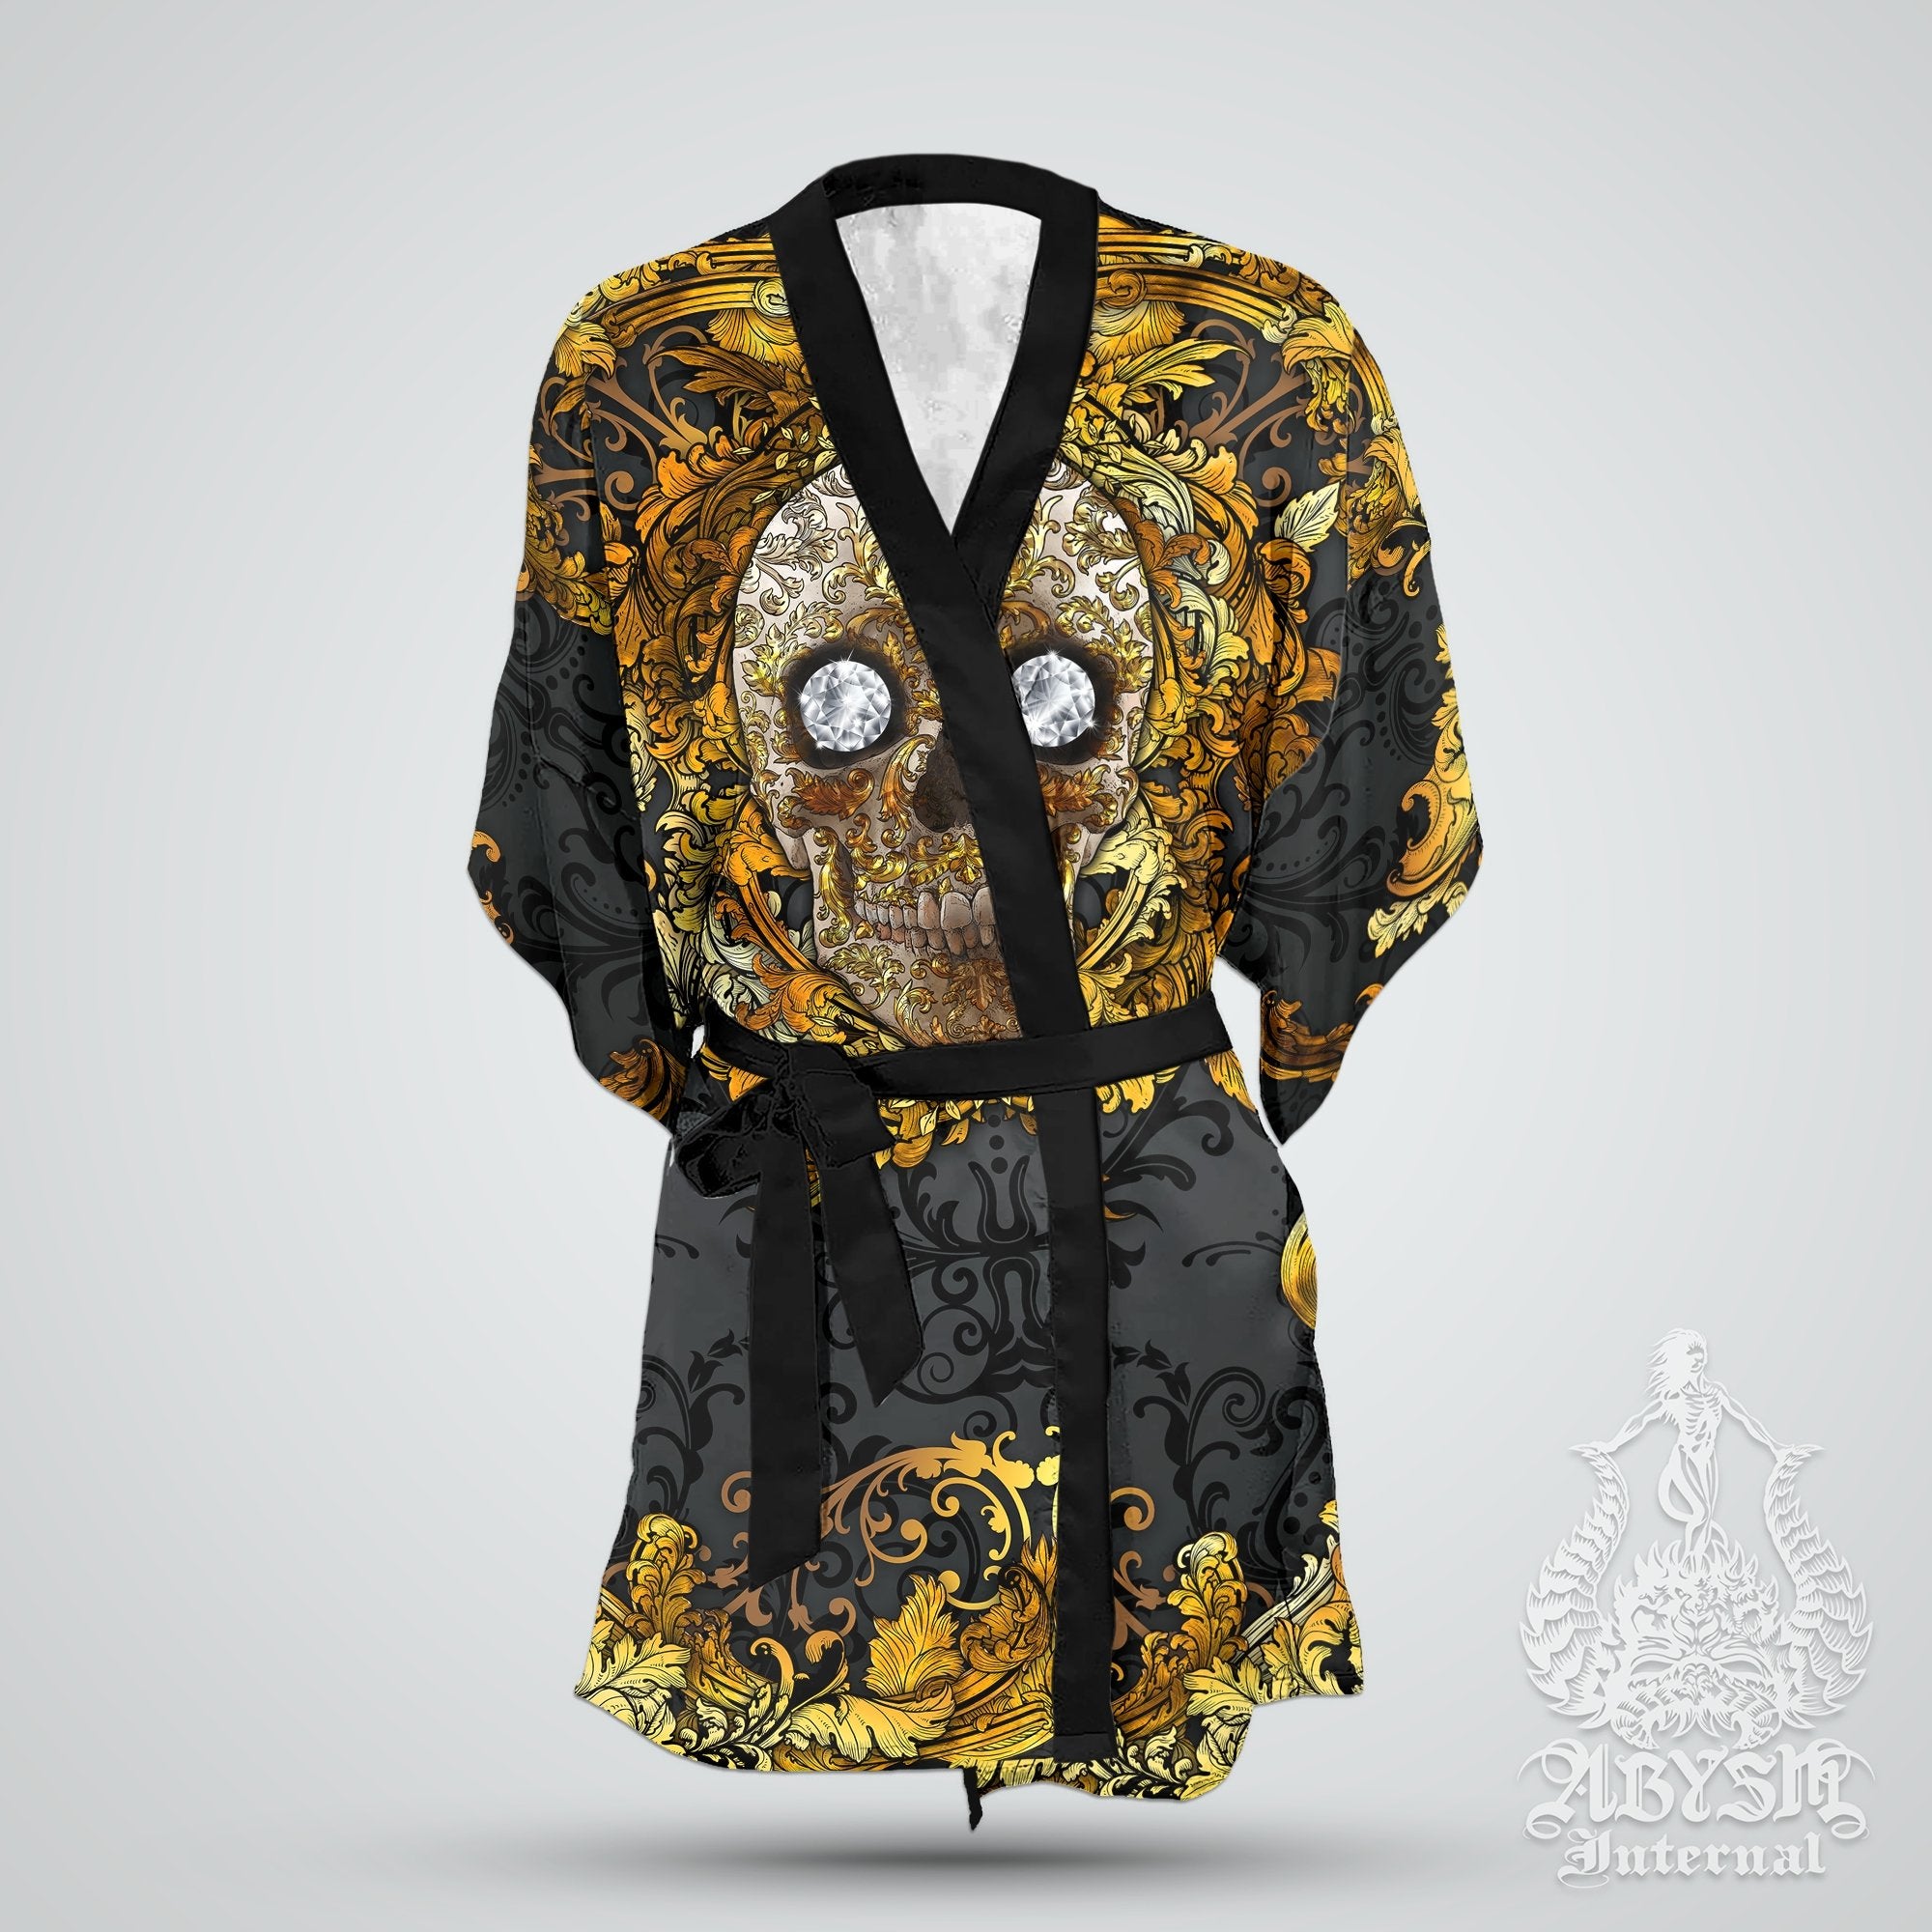 Skull Cover Up, Beach Outfit, Party Kimono, Summer Festival Robe, Goth Indie and Alternative Clothing, Unisex - Gold Black - Abysm Internal